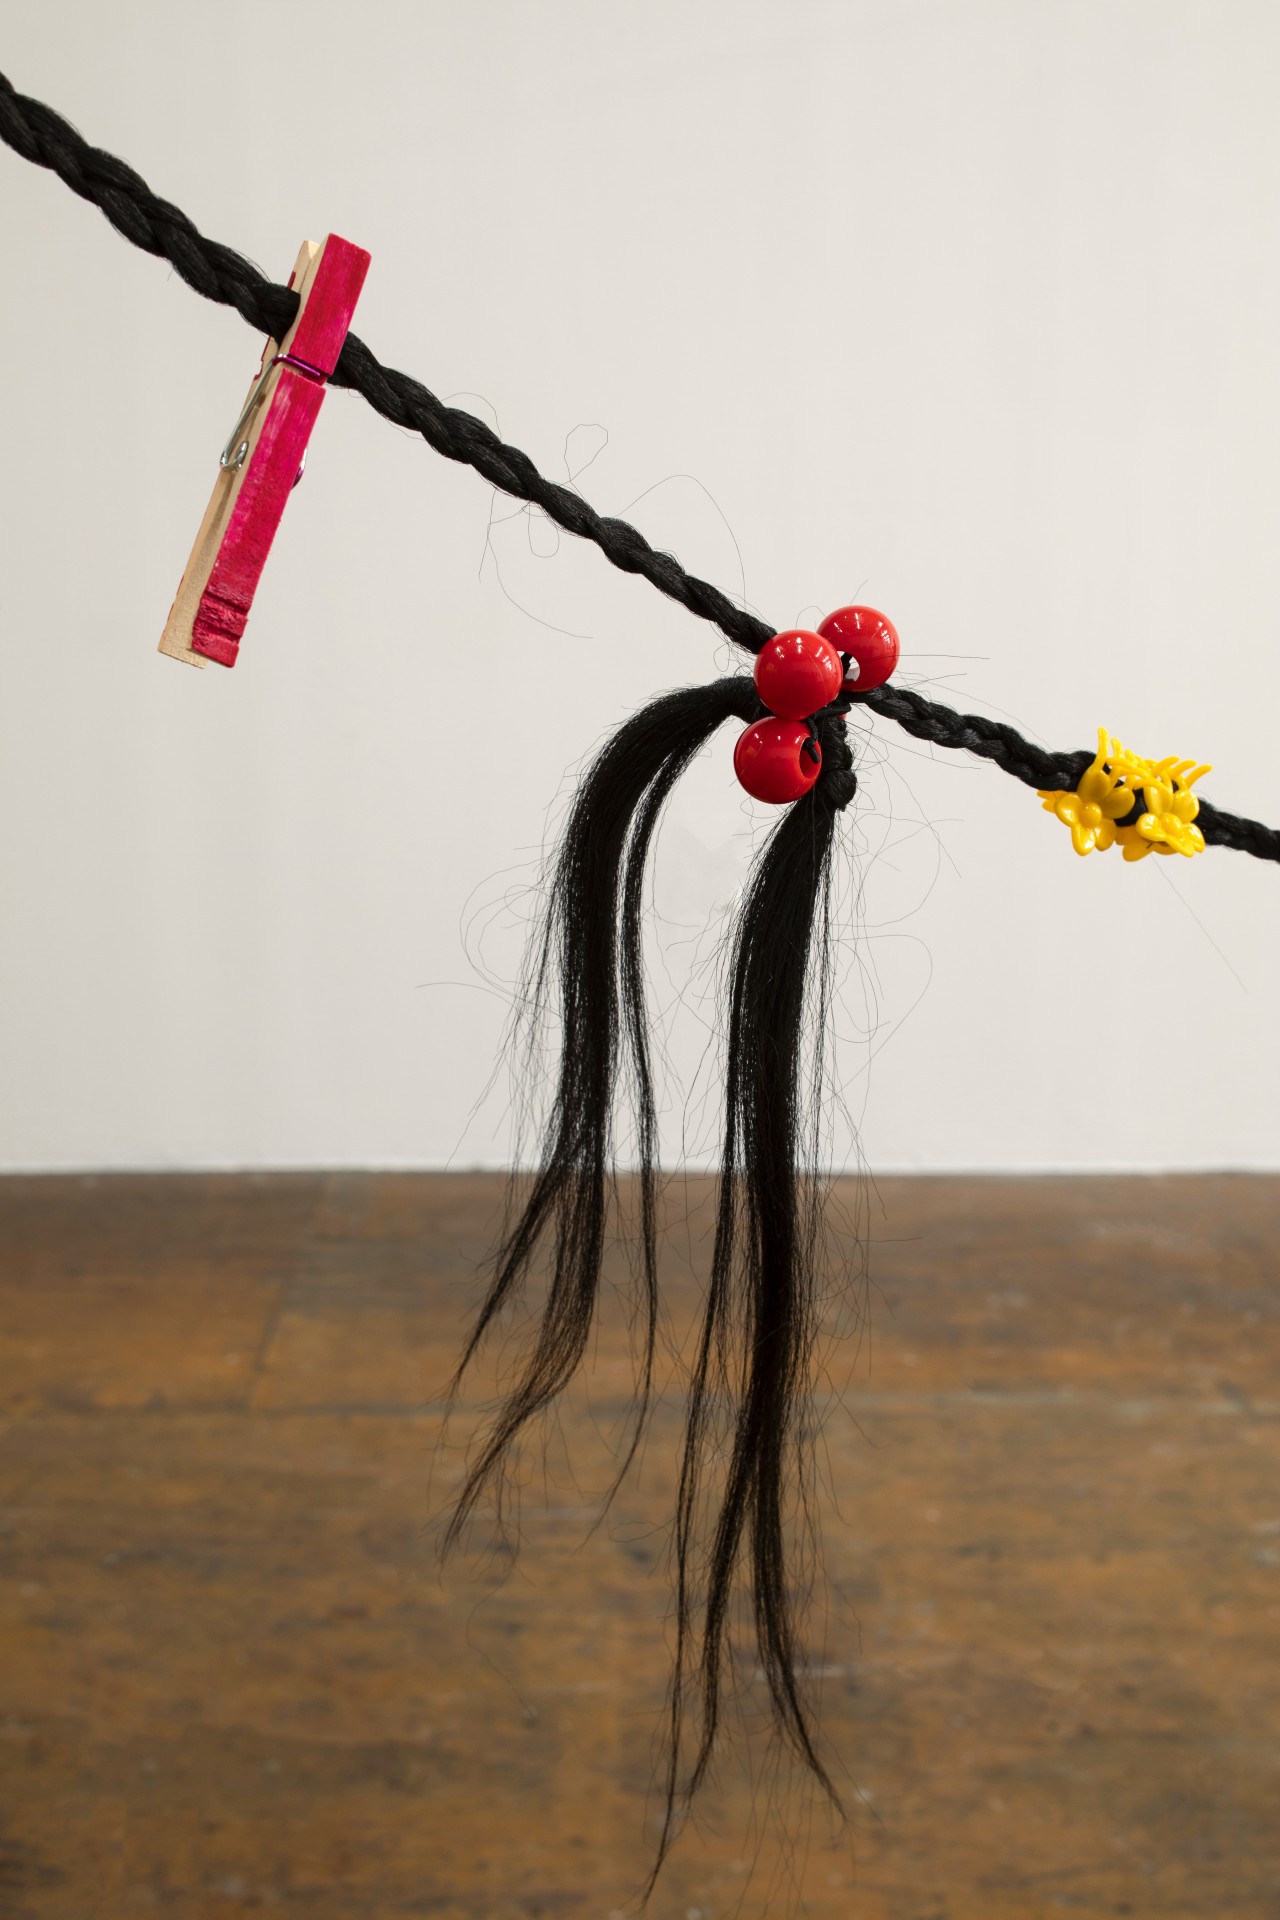 *Hair Line Towers: Hang Me Out to Dry*, 2016–18, 2021 (detail), in *Keioui Keijaun Thomas: Hands Up, Ass Out*, curated by Shehab Awad as Executive Care\*, 2021 at Participant Inc, New York. Photo: Daniel Kukla.